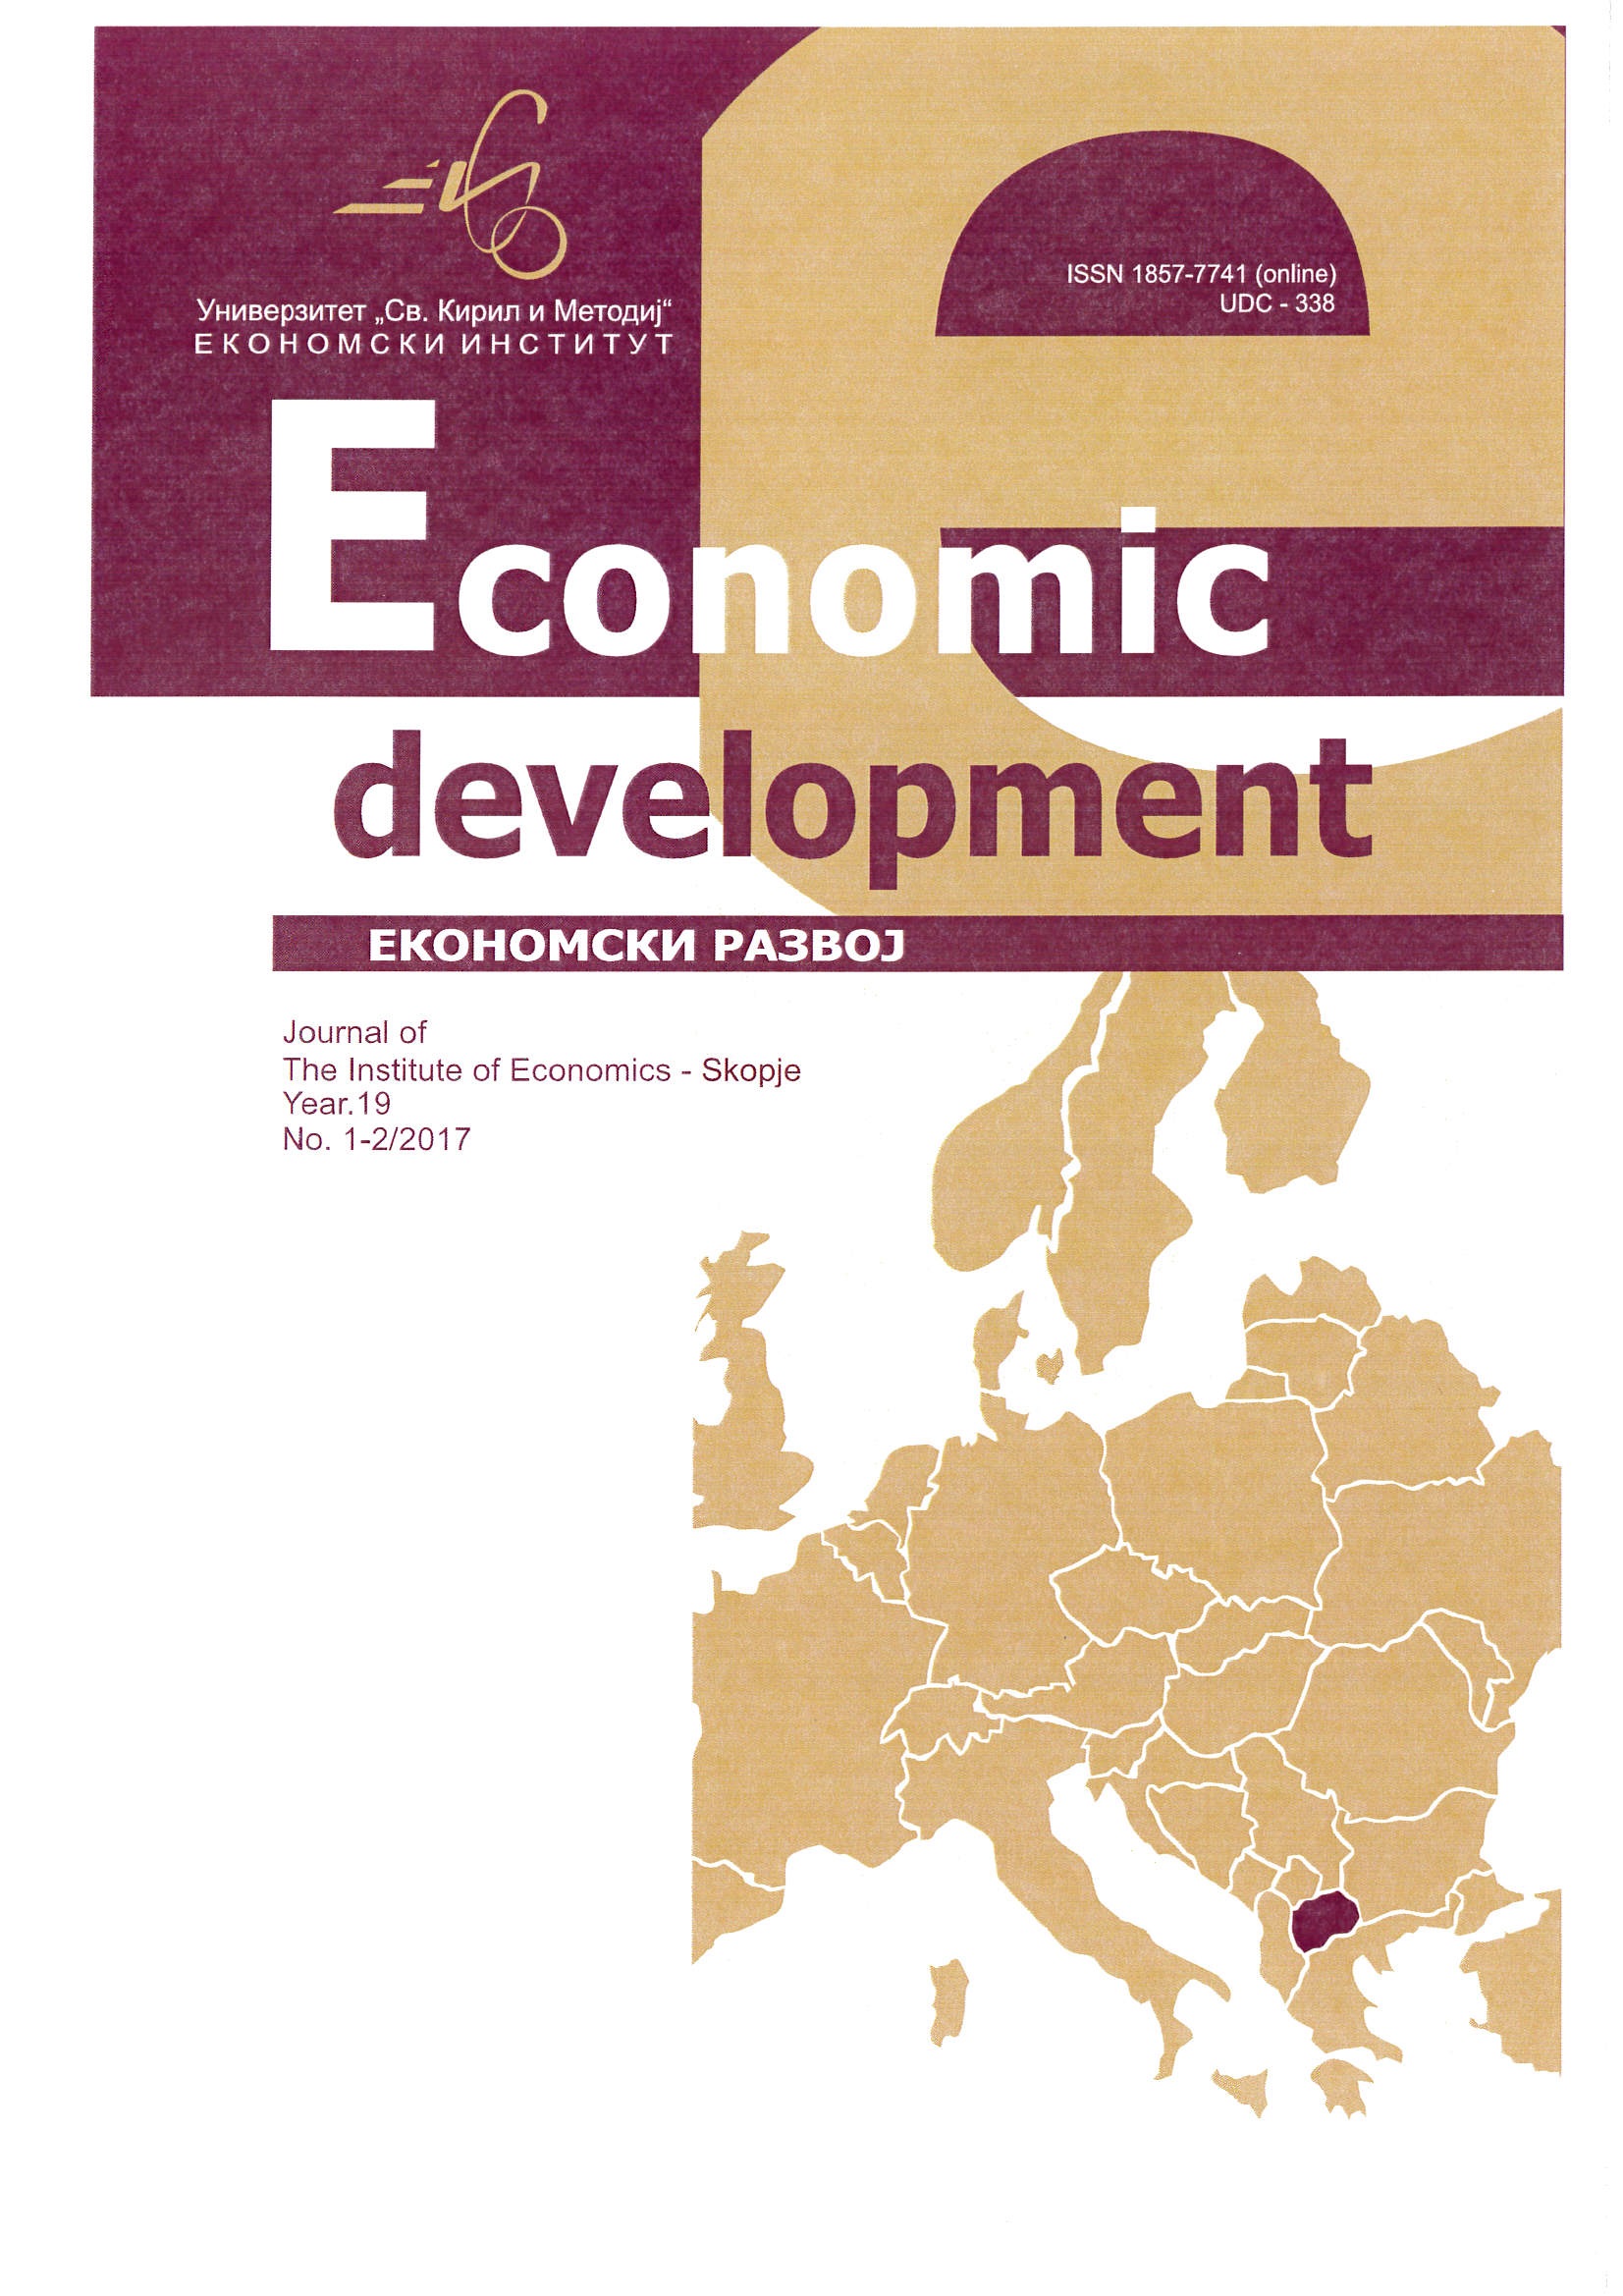 Implications of budget deficit on economic growth  - case study of the Republic of Macedonia Cover Image